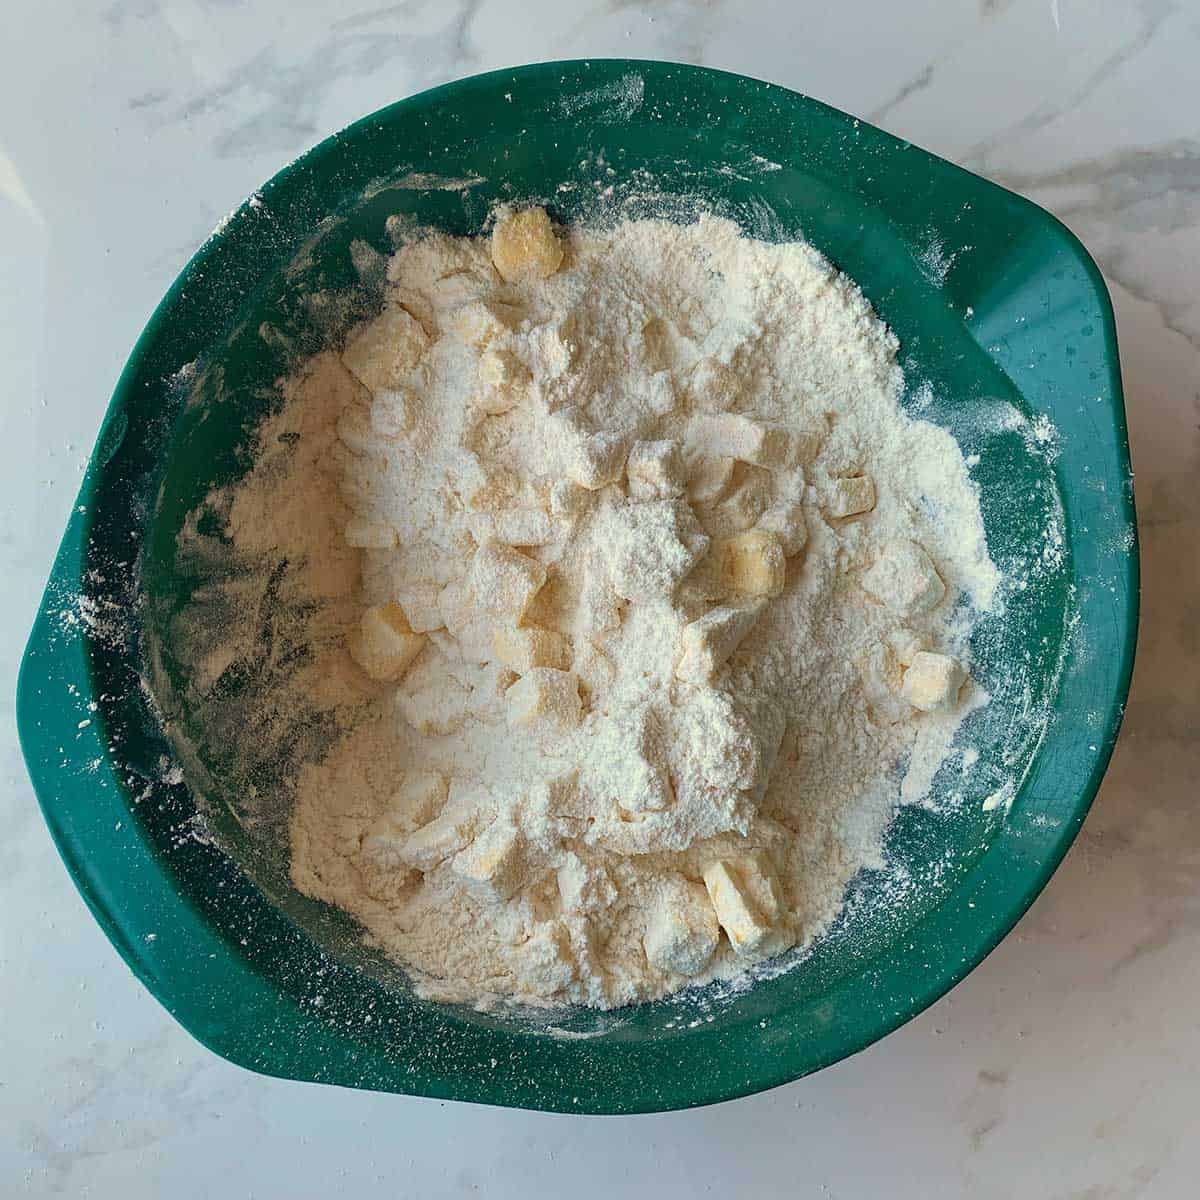 Butter and flour in a green bowl.